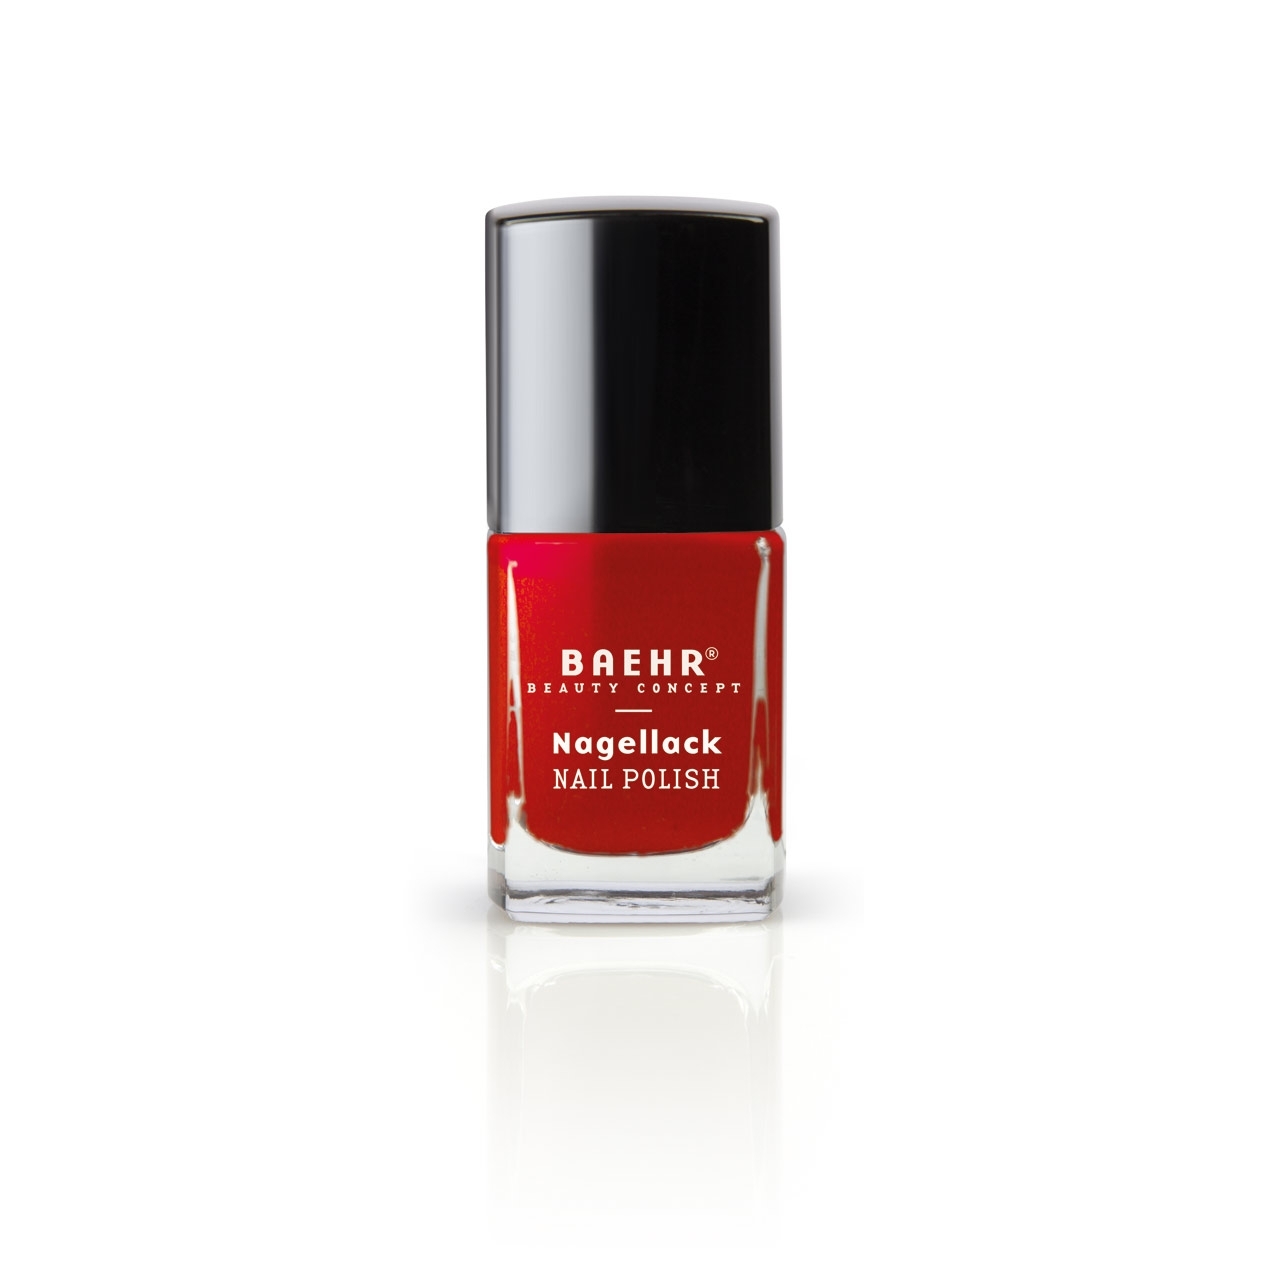 BAEHR BEAUTY CONCEPT - NAILS Nagellack red royal 11 ml